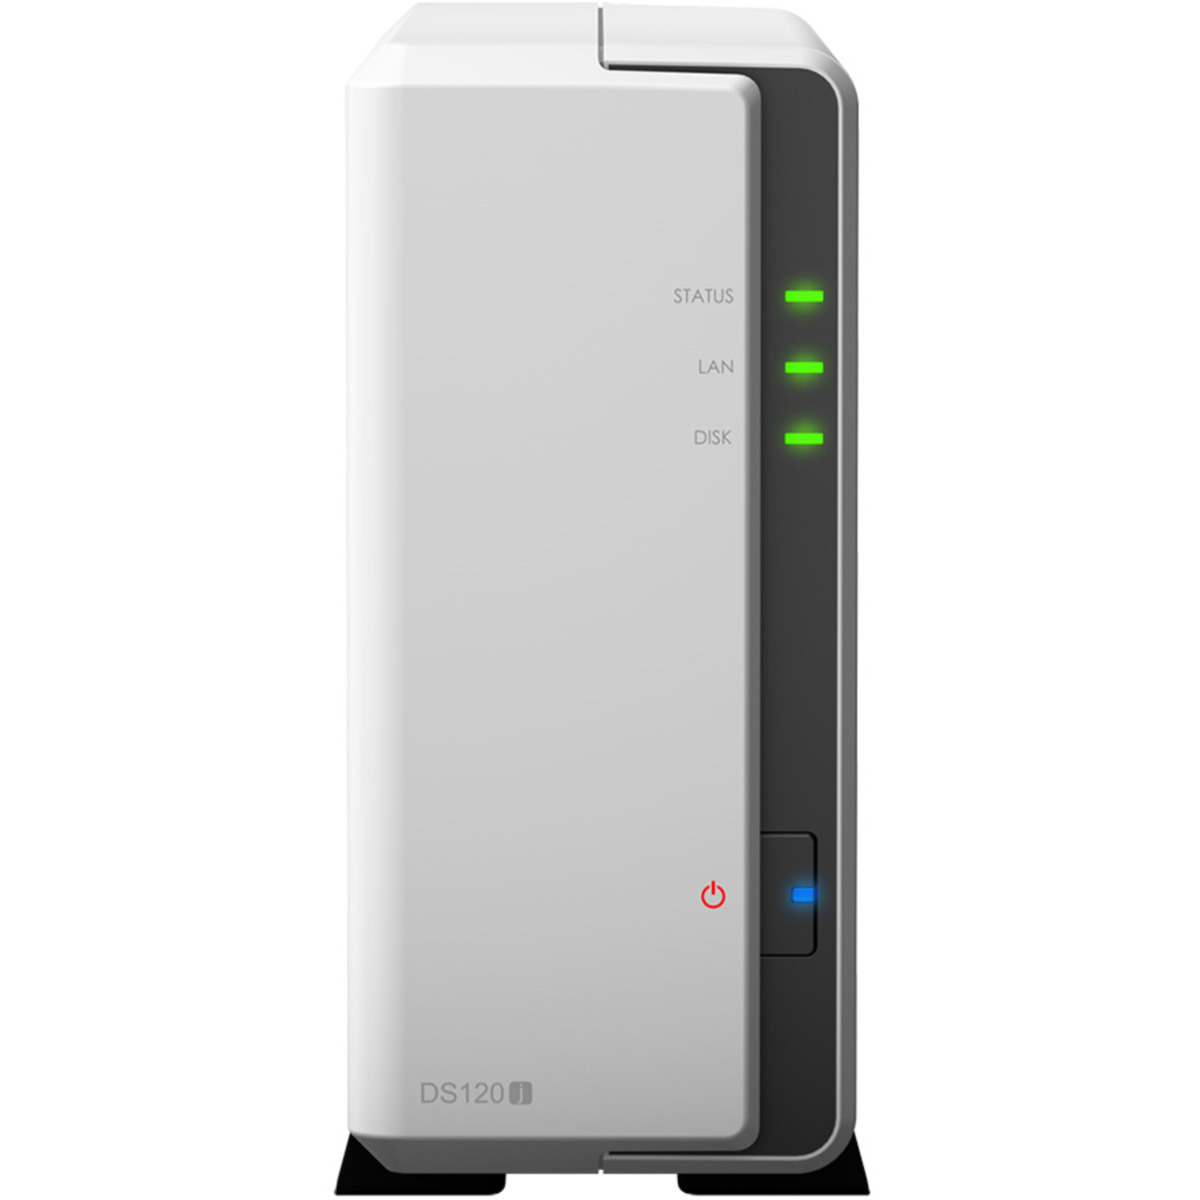 buy Synology DiskStation DS120j 2tb Desktop NAS - Network Attached Storage Device 1x2000gb Seagate IronWolf Pro ST2000NT001 3.5 7200rpm SATA 6Gb/s HDD NAS Class Drives Installed - Burn-In Tested - nas headquarters buy network attached storage server device das new raid-5 free shipping simply usa DiskStation DS120j